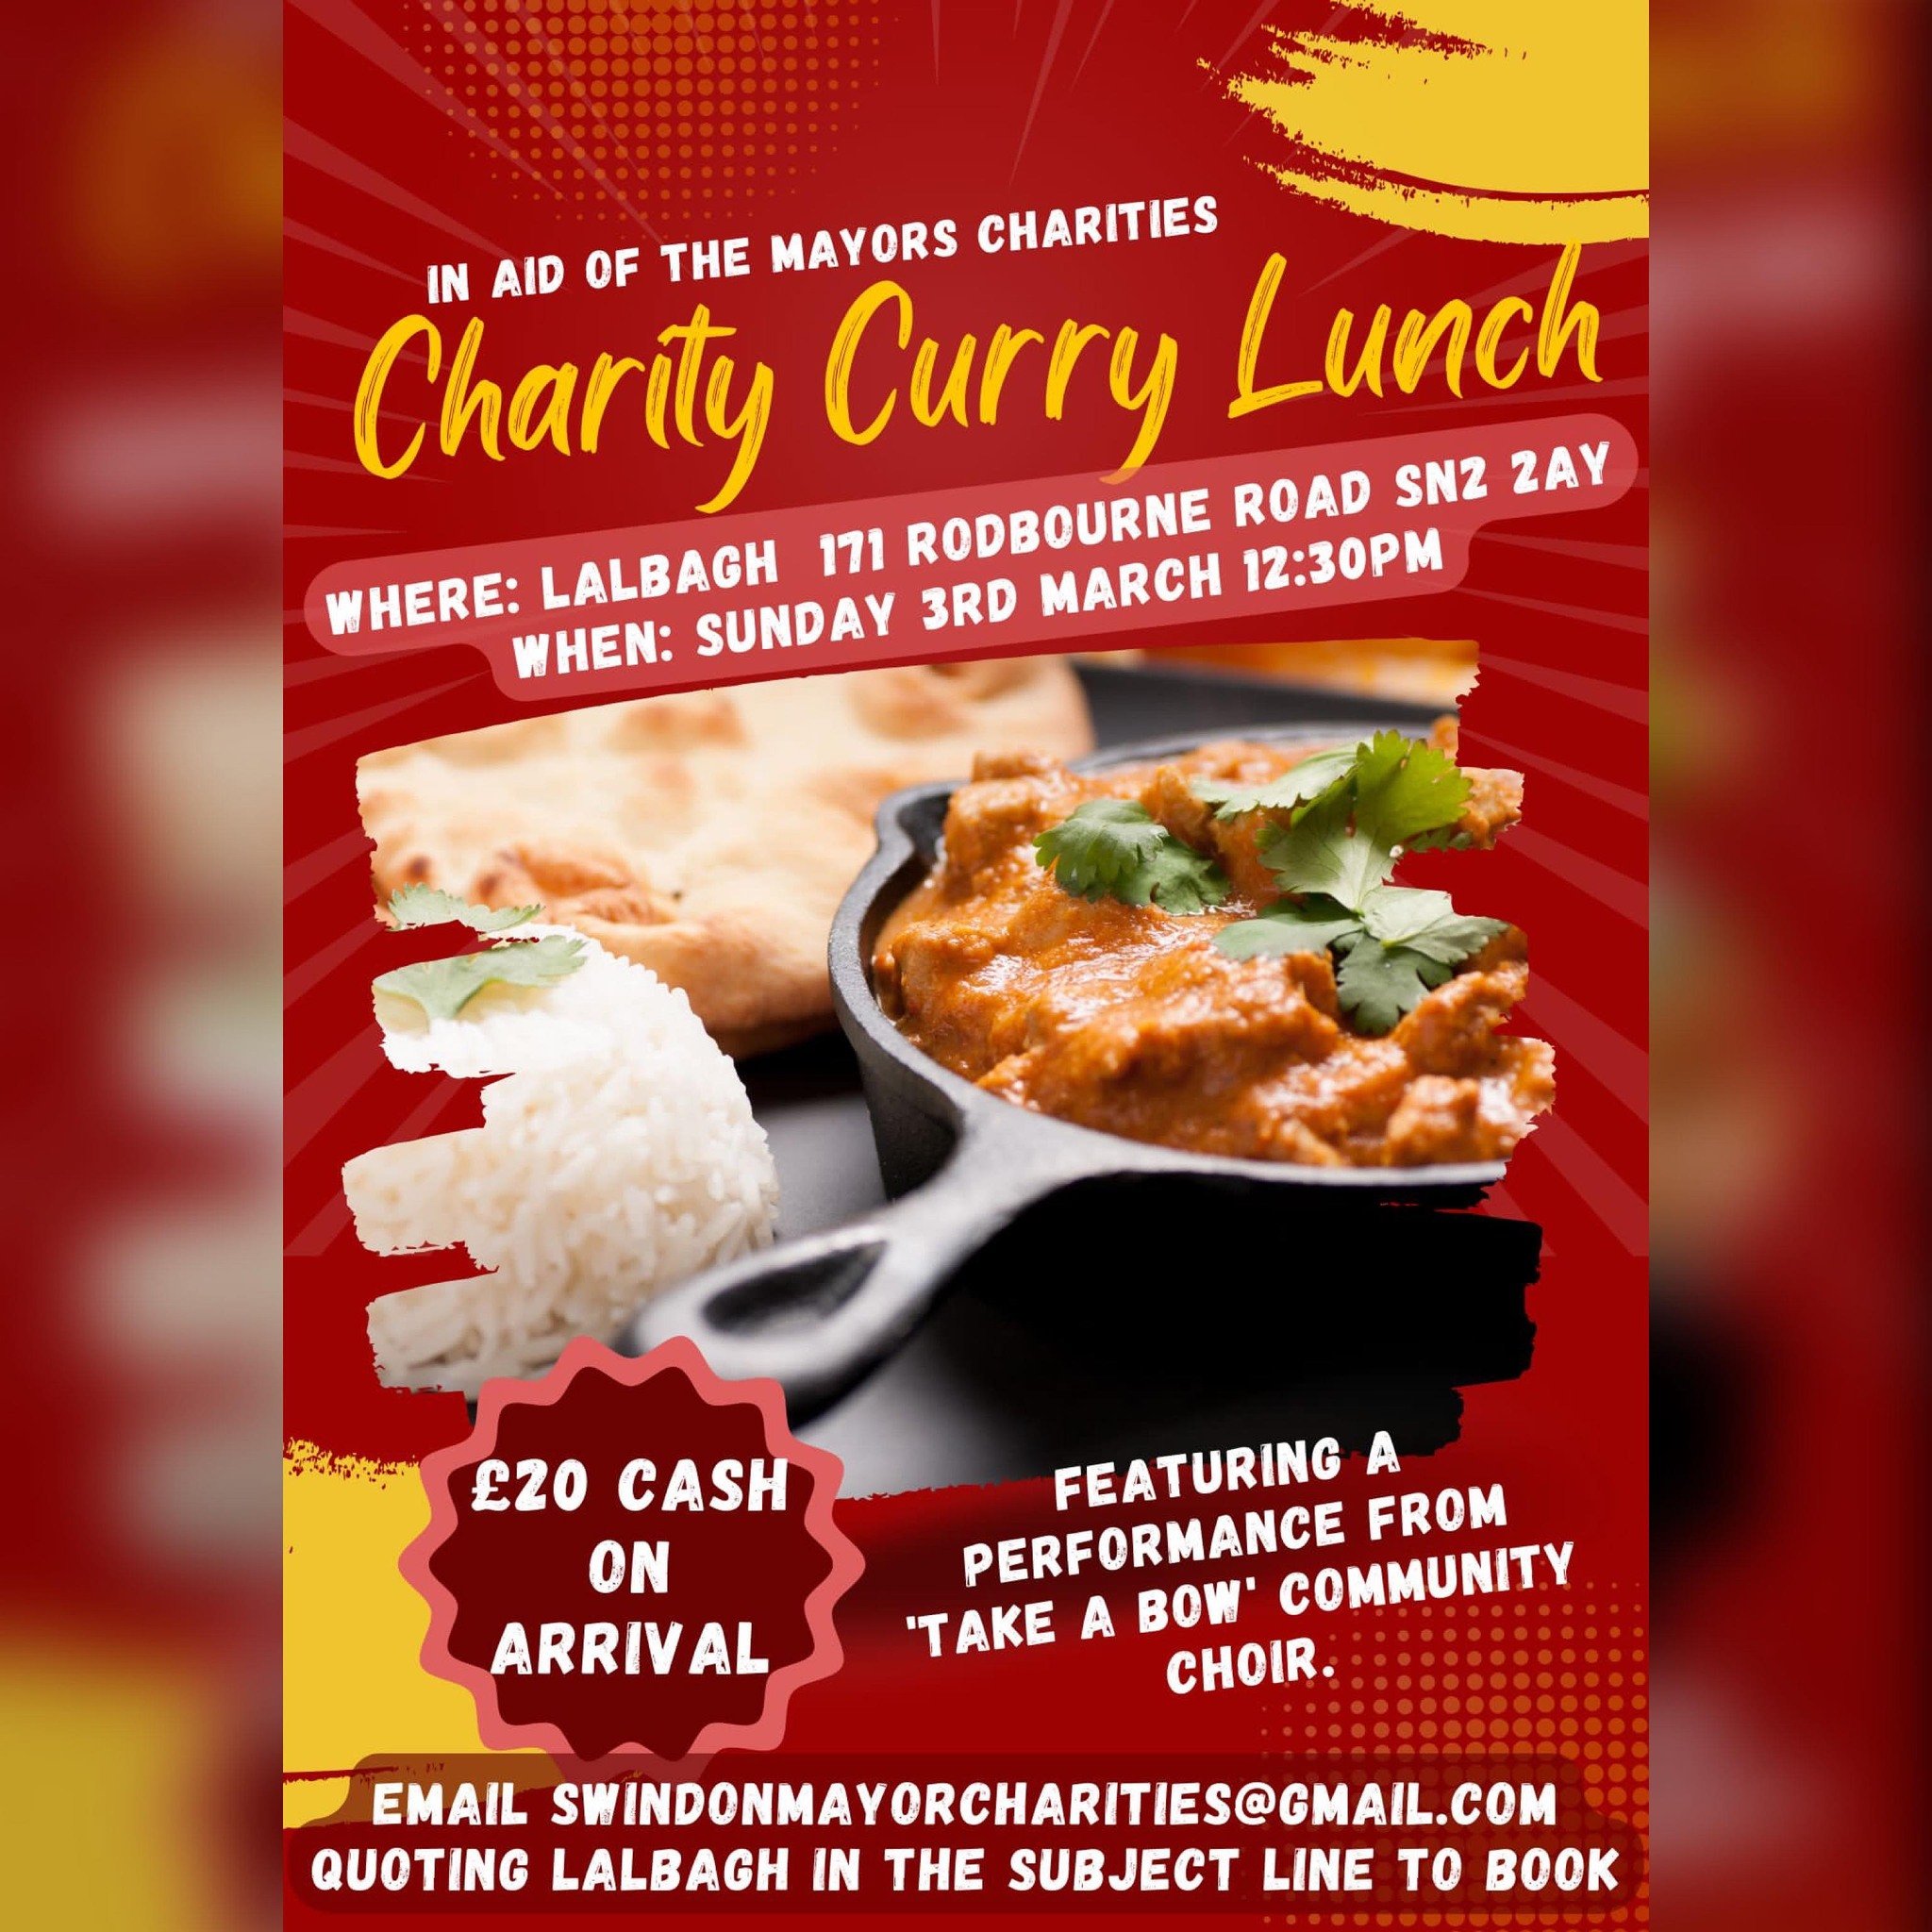 Come join us on the 3rd March at the Lapbagh on Rodbourne road in aid of the Mayors charities of choice for a curry lunch!

&pound;20 cash on arrival! @barbara.parry.921230